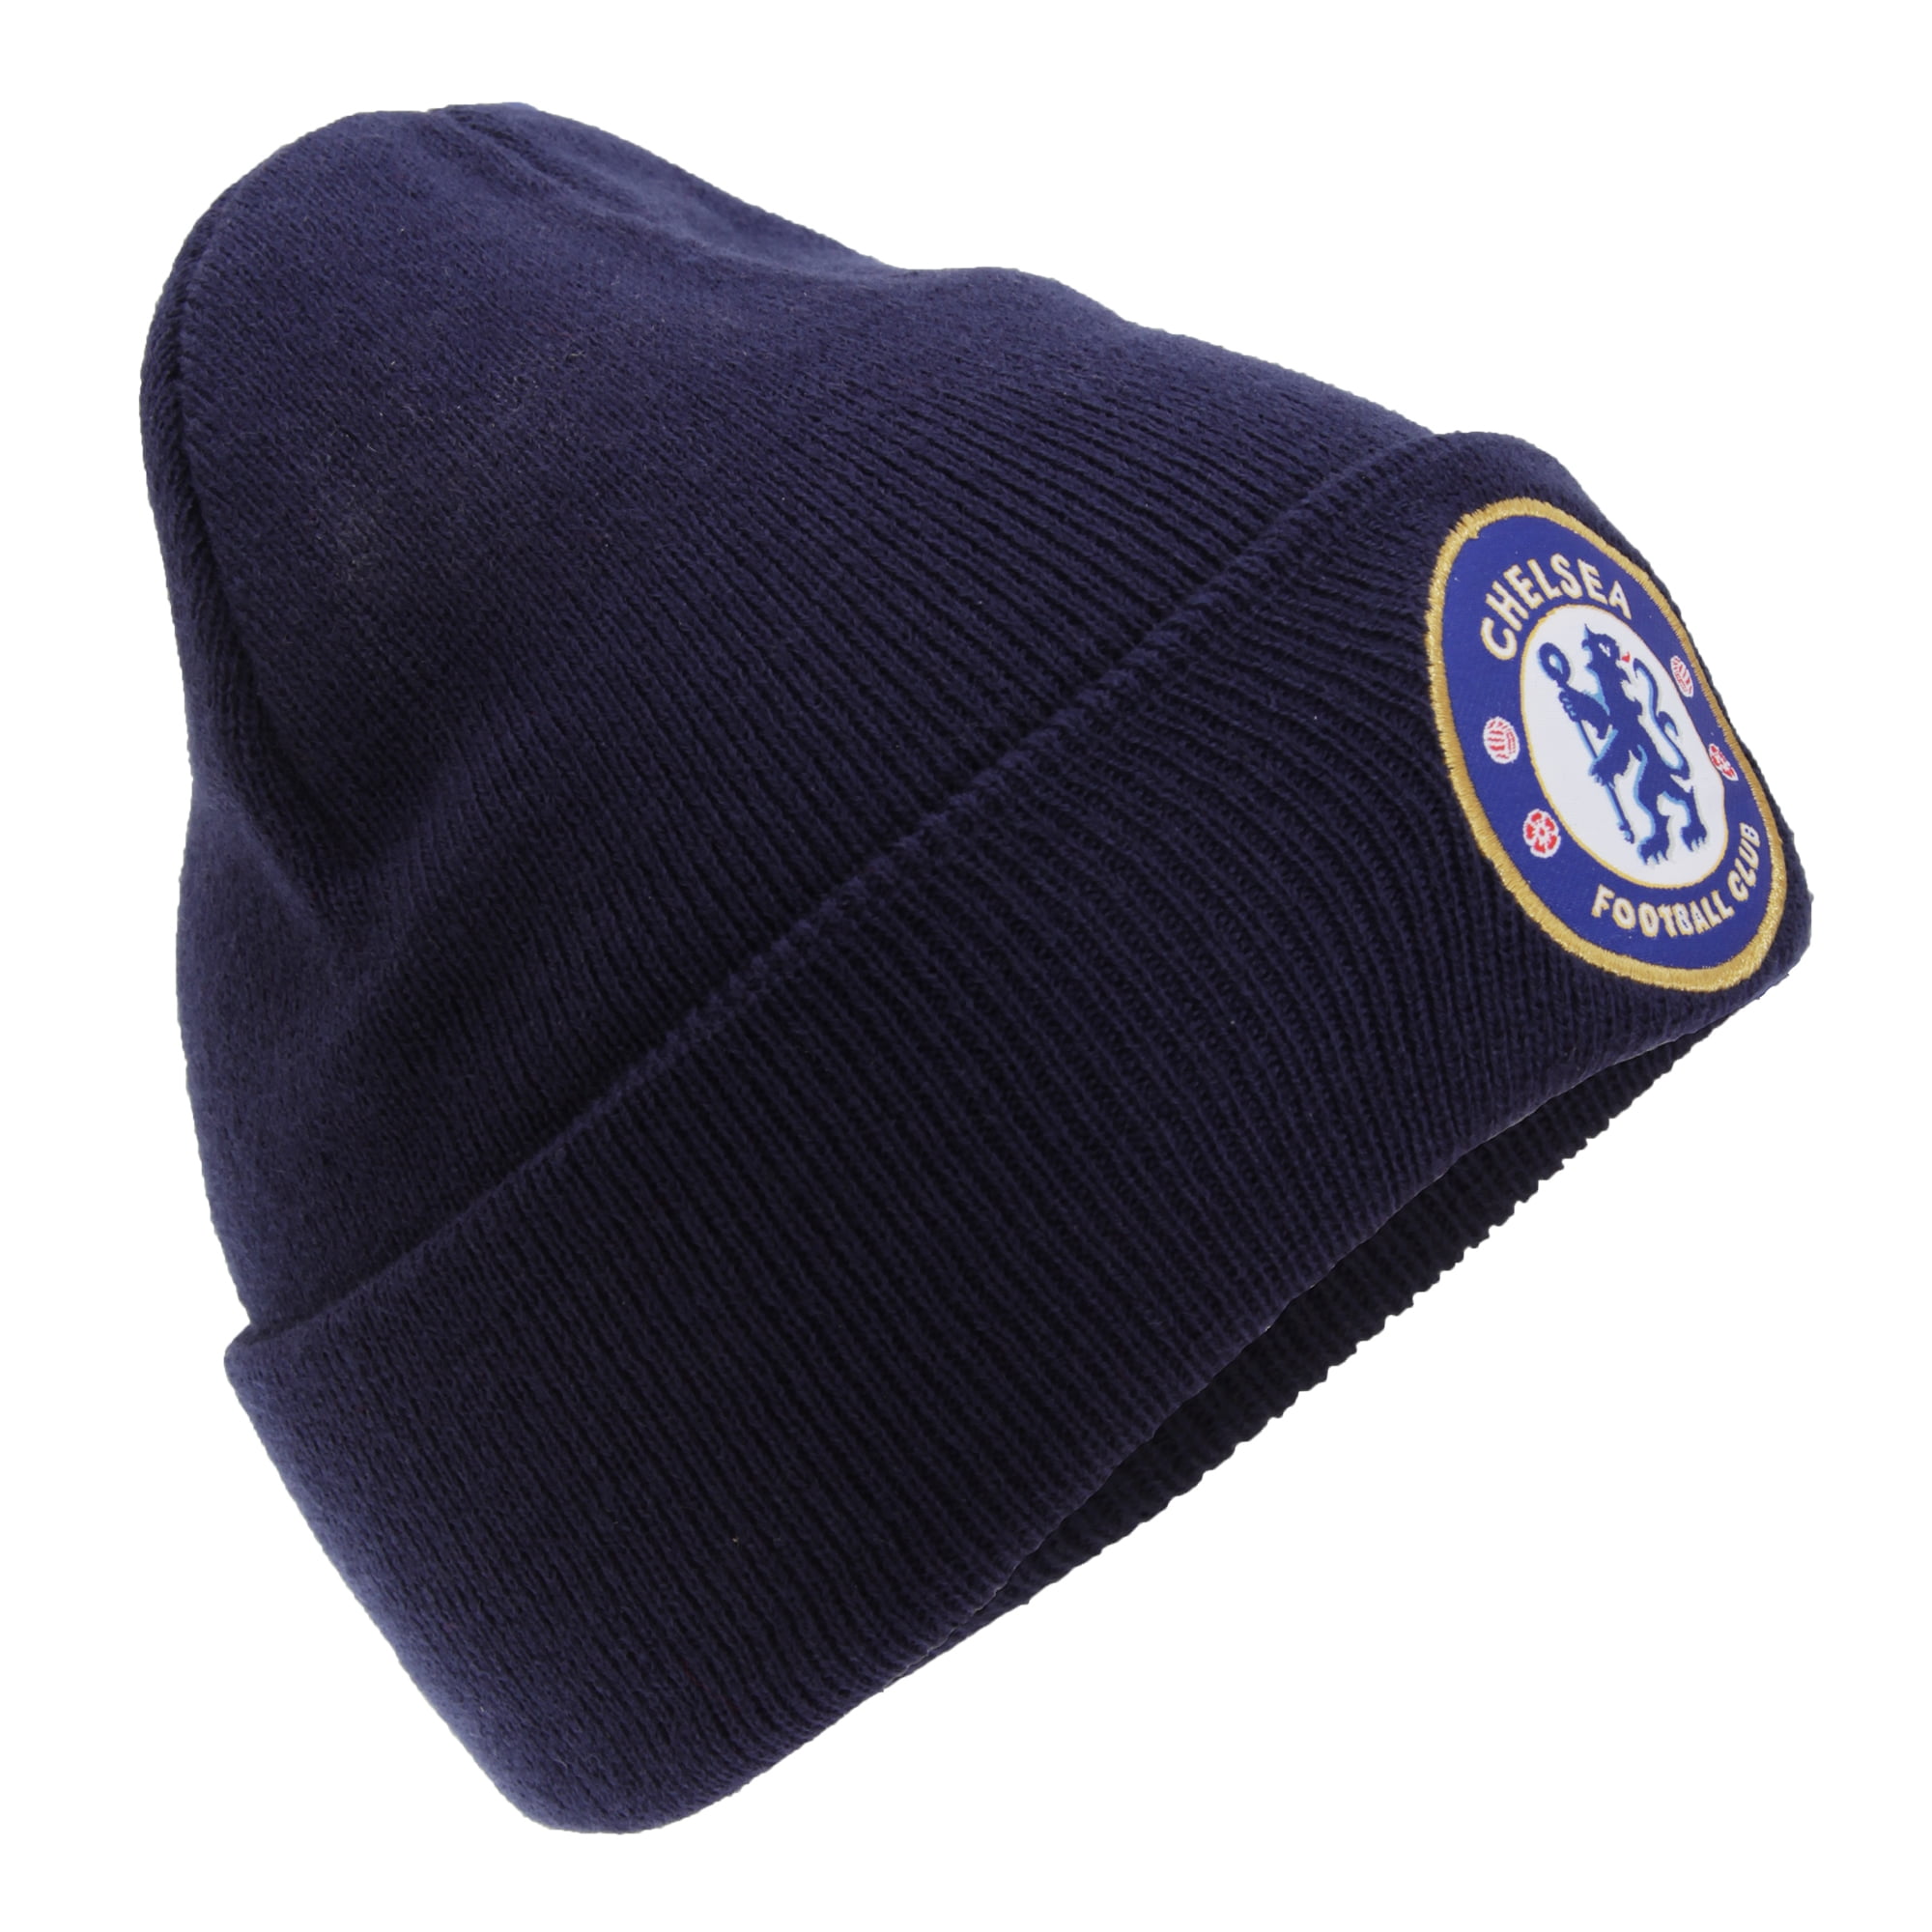 Chelsea Reversible Knitted Hat Beanie Winter Crest New Official Licensed Product 